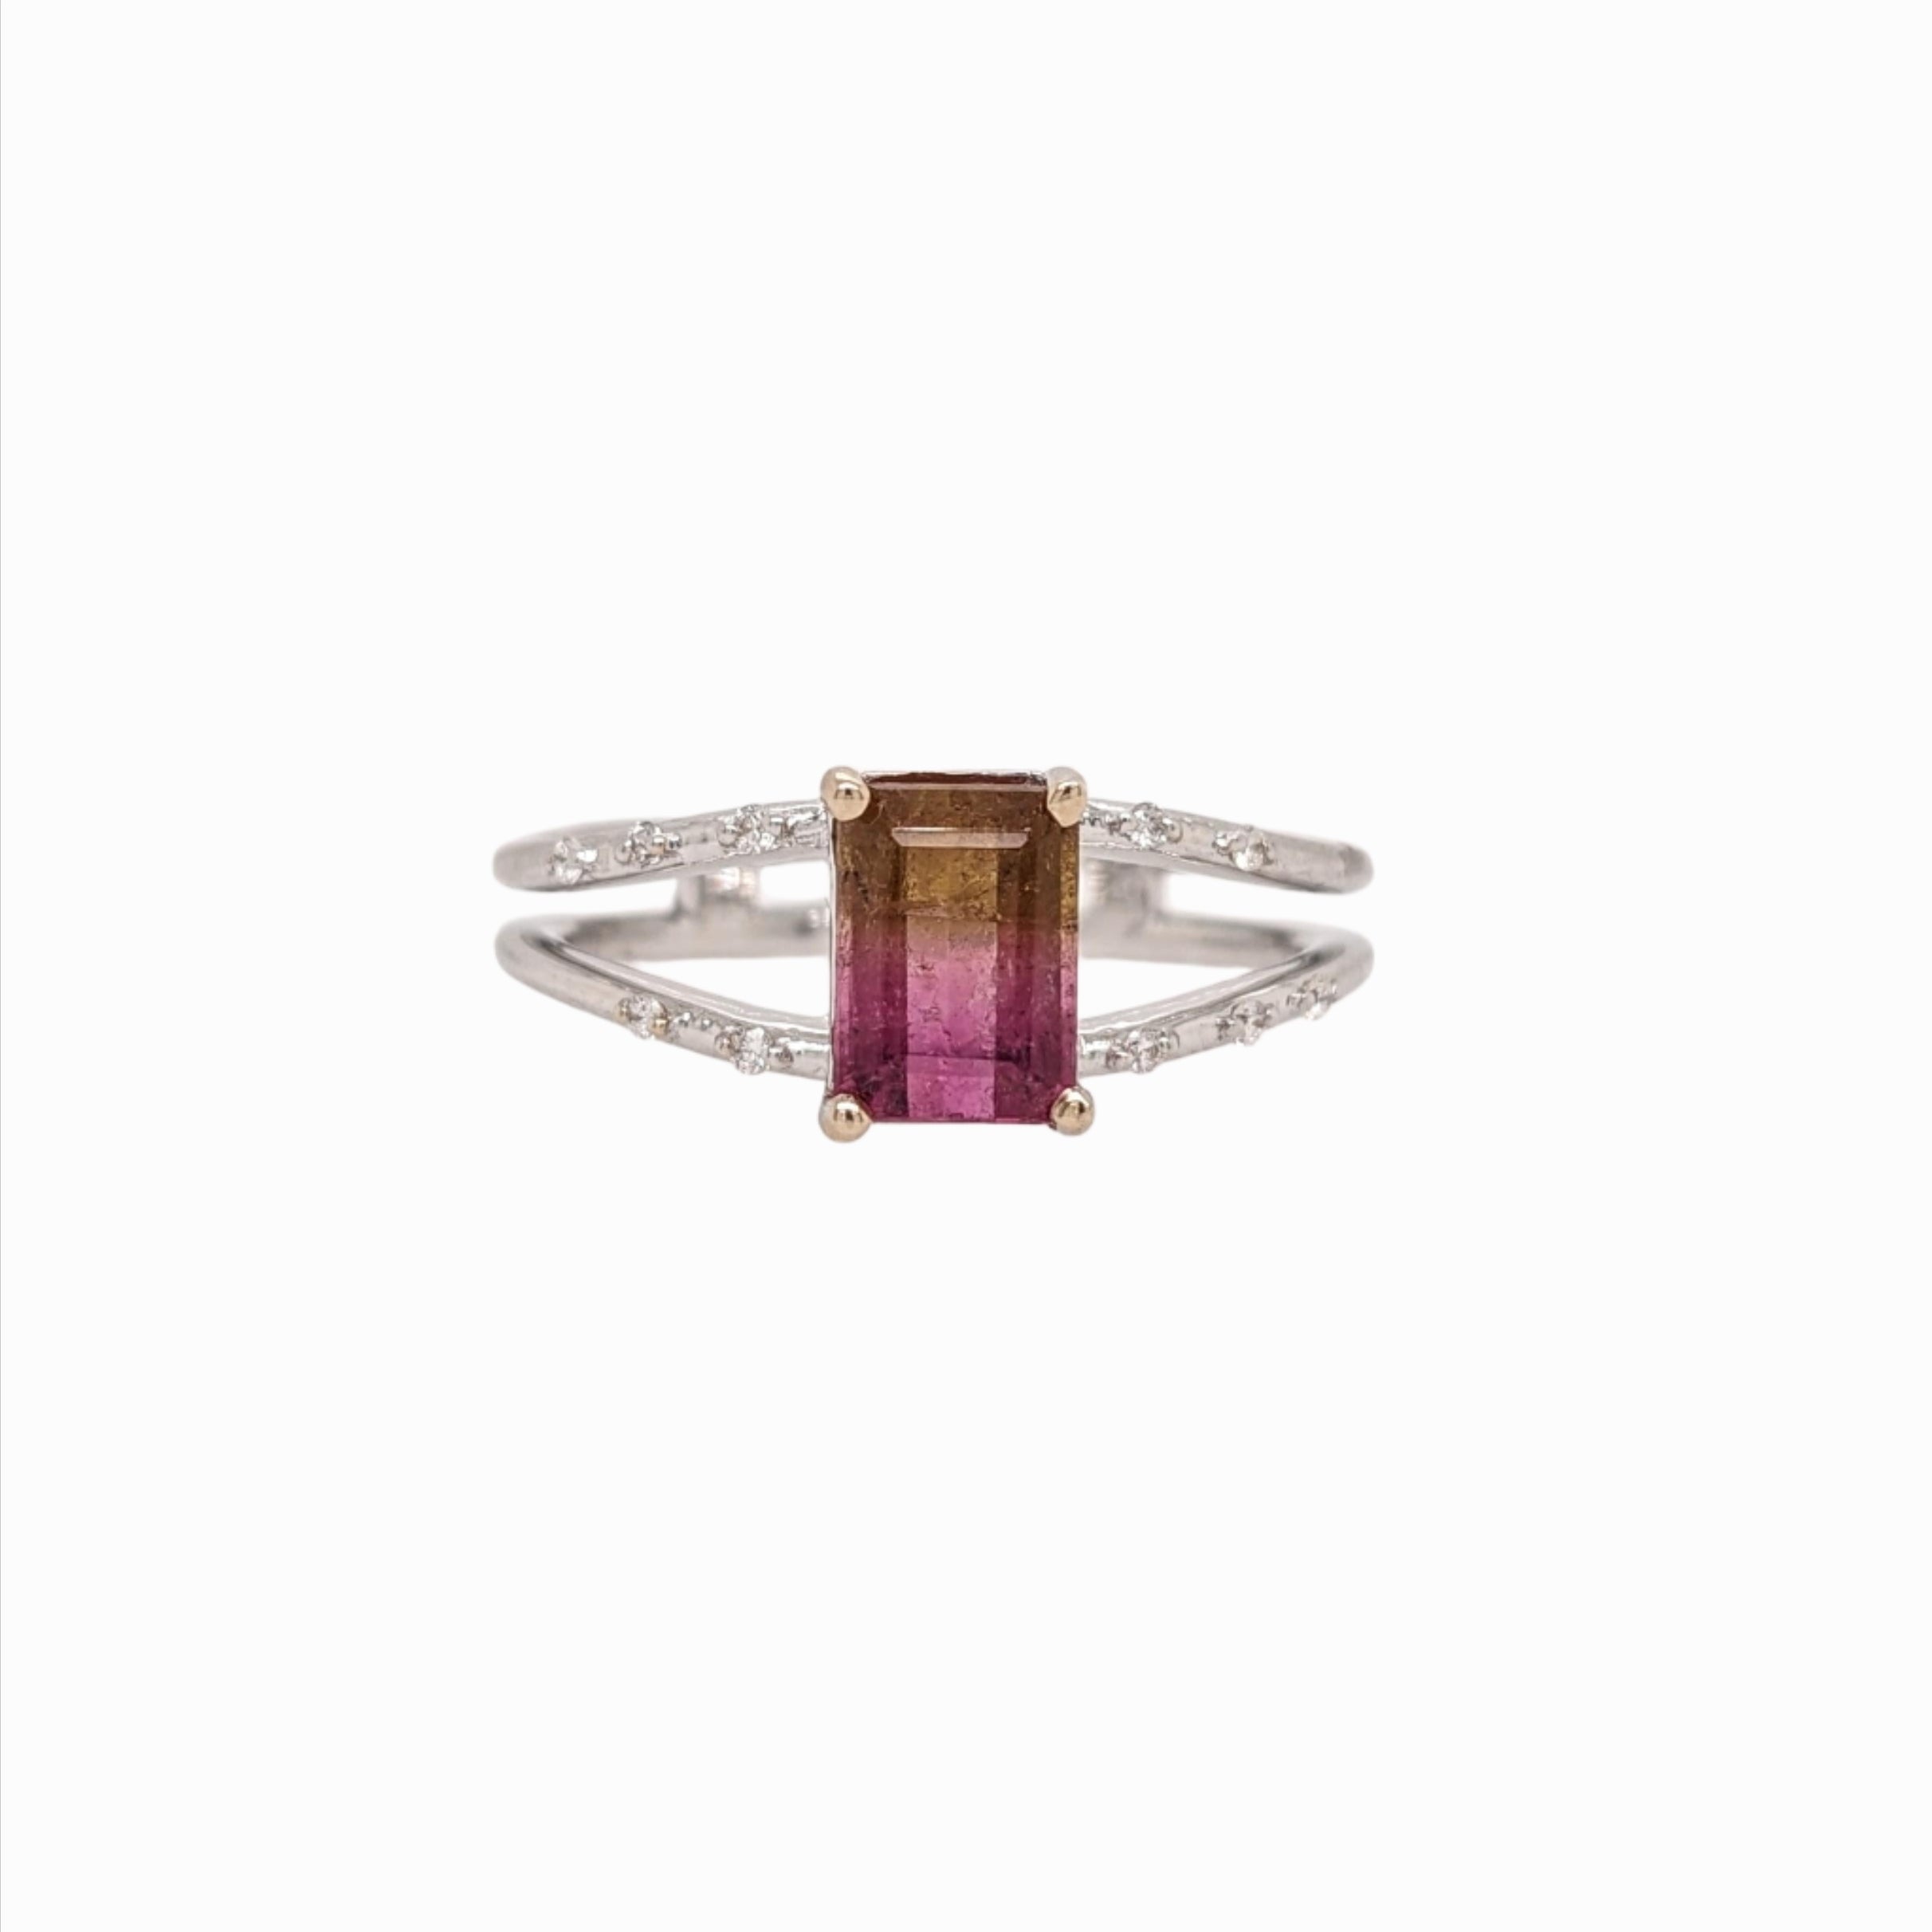 Bi-color Tourmaline Ring w Earth Mined Diamonds in Solid 14K White Gold EM 7x5mm